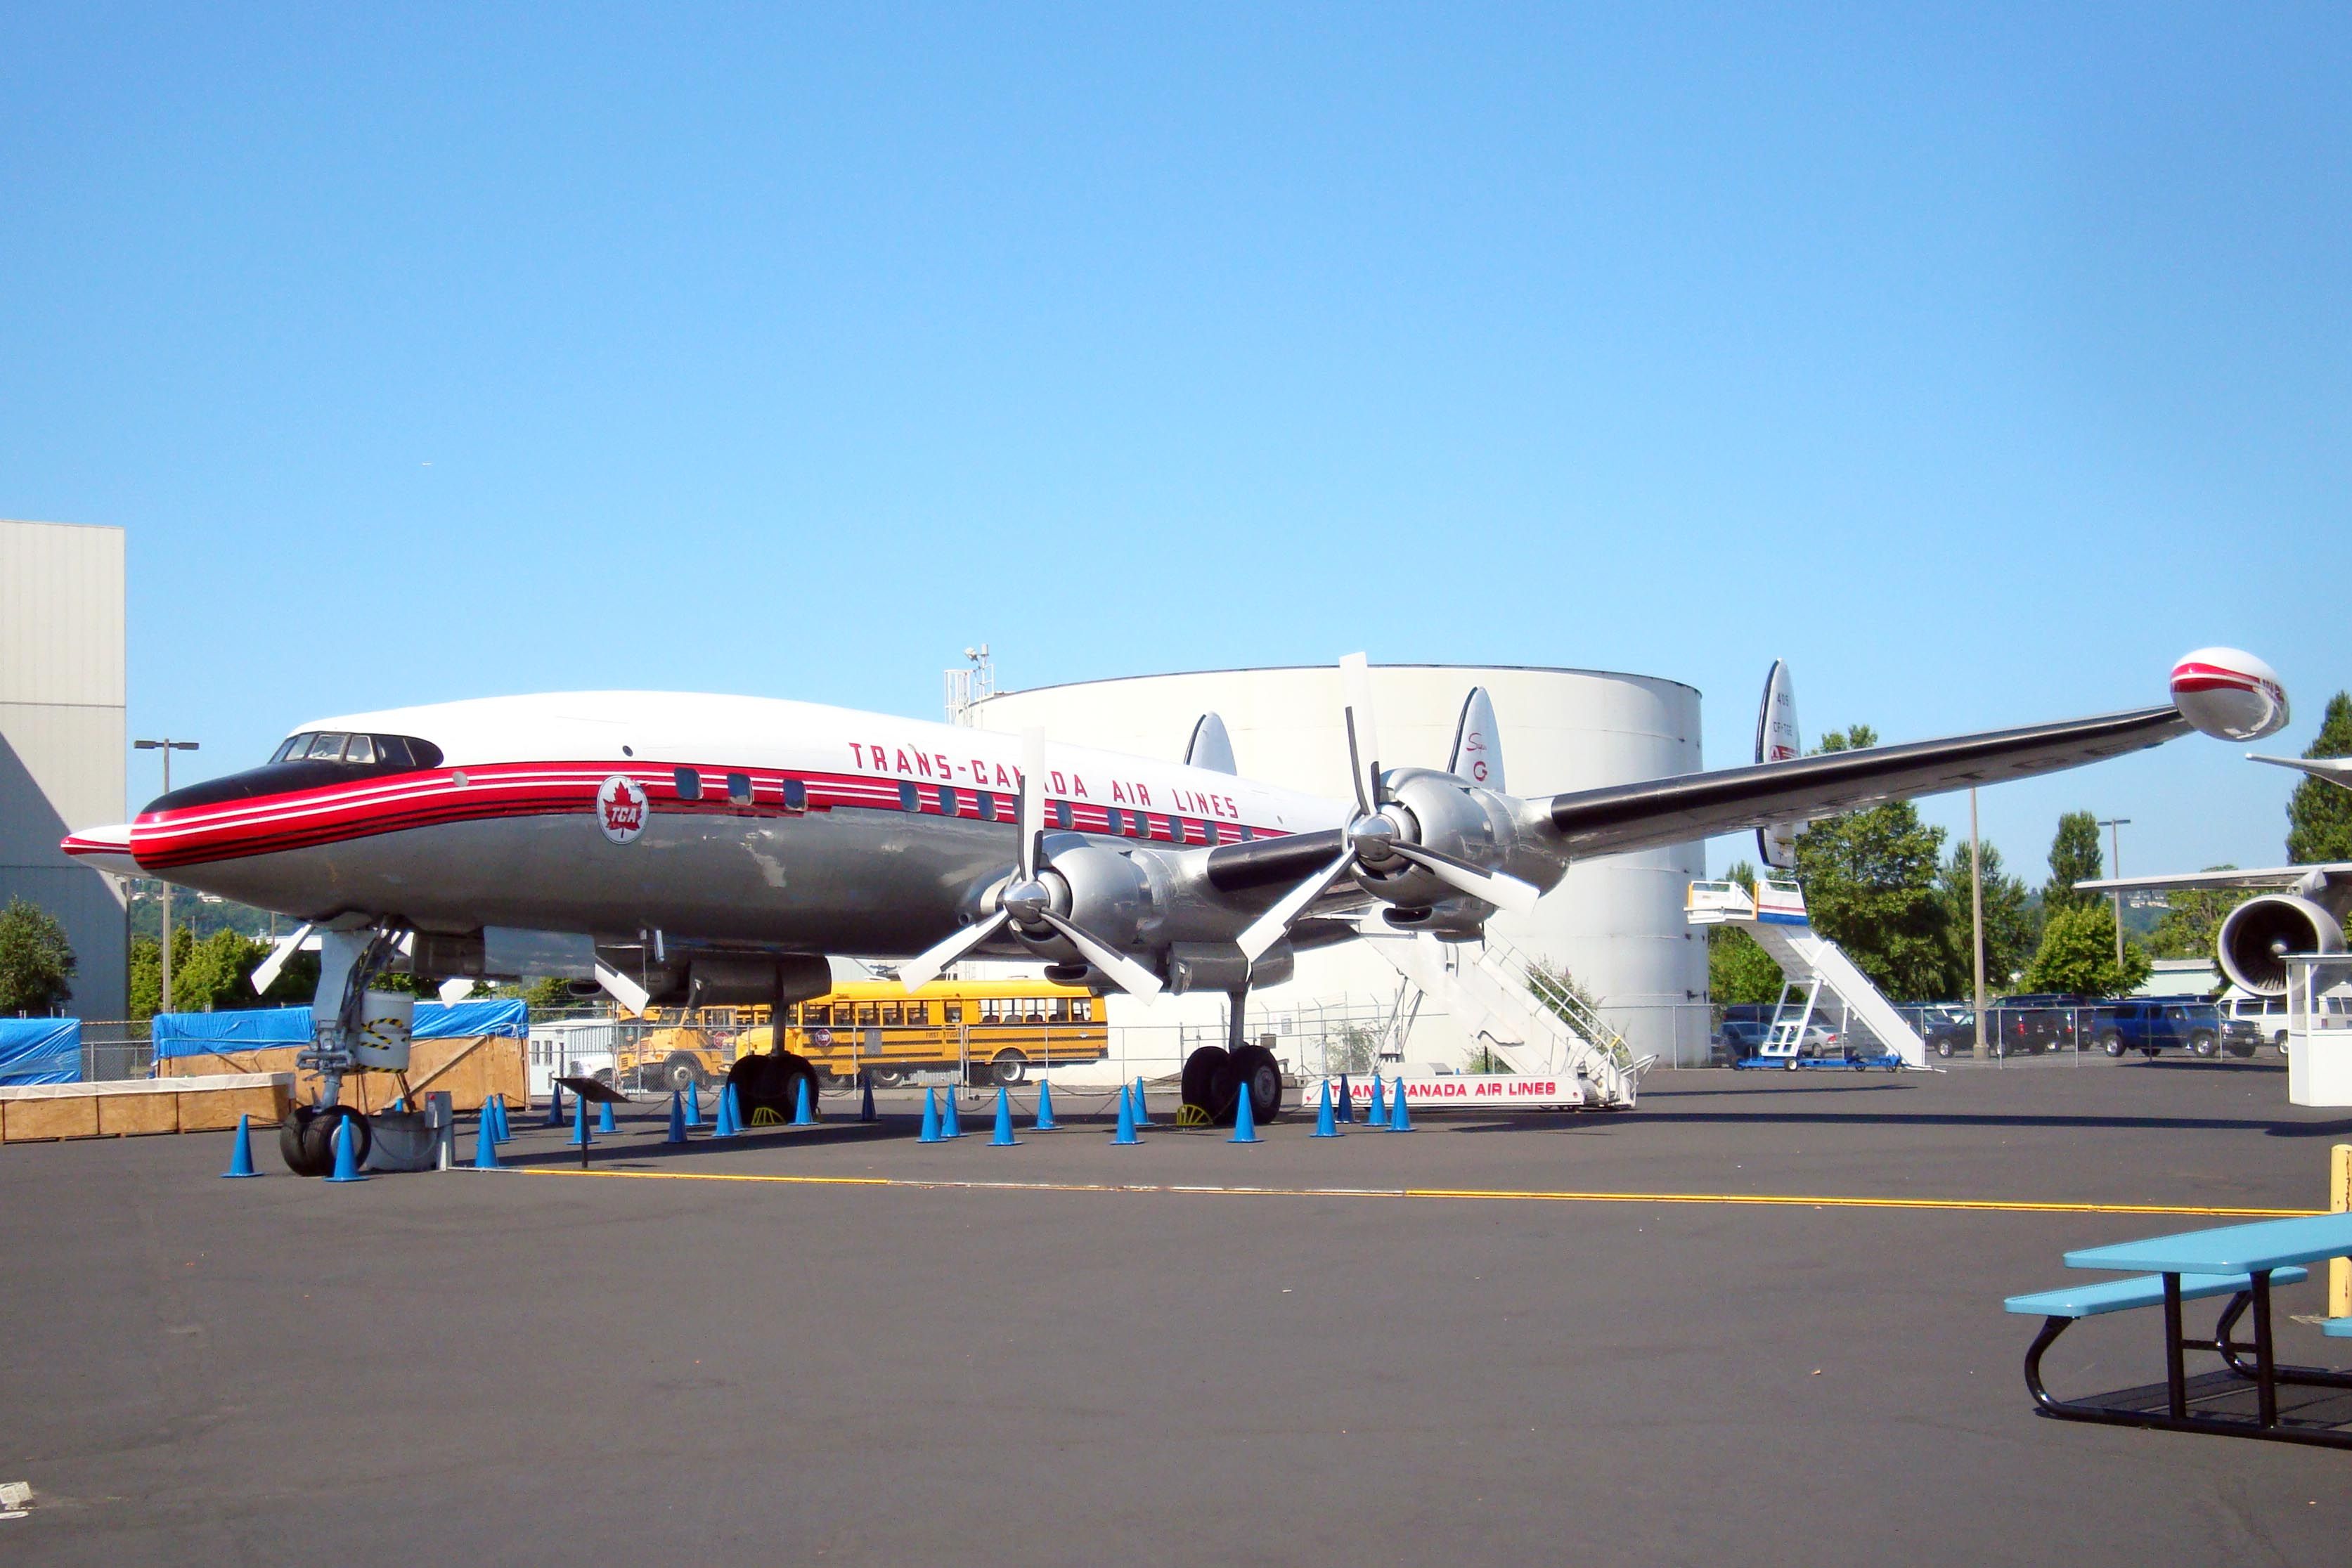 A Trans Canada Super Constellation on display at a museum.